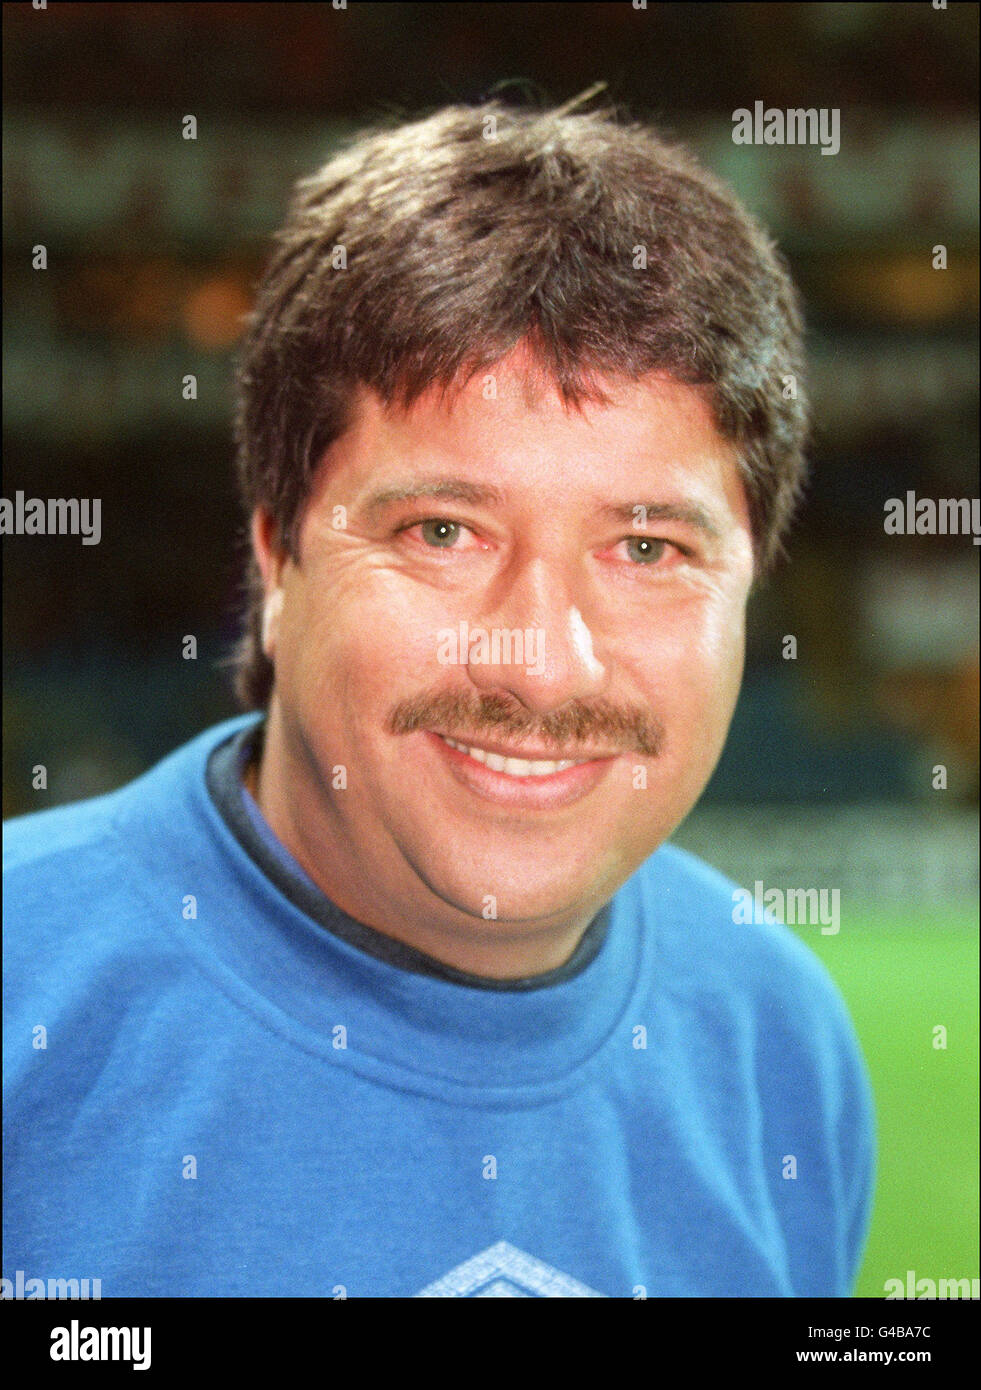 World Cup 1998 AFP PHOTO Colombia's soccer coach Hernan Dario Gomez smiles on the sidelines prior to his team's friendly match against Norway, 08 October in Oslo. AFP/Gabriel BOUYS L'entra neur de l' quipe de Colombie, Hernan Dario Gomez, sourit avant le match amical de son  quipe contre la Norv ge, le 08 octobre   Oslo. AFP/Gabriel BOUYS Stock Photo